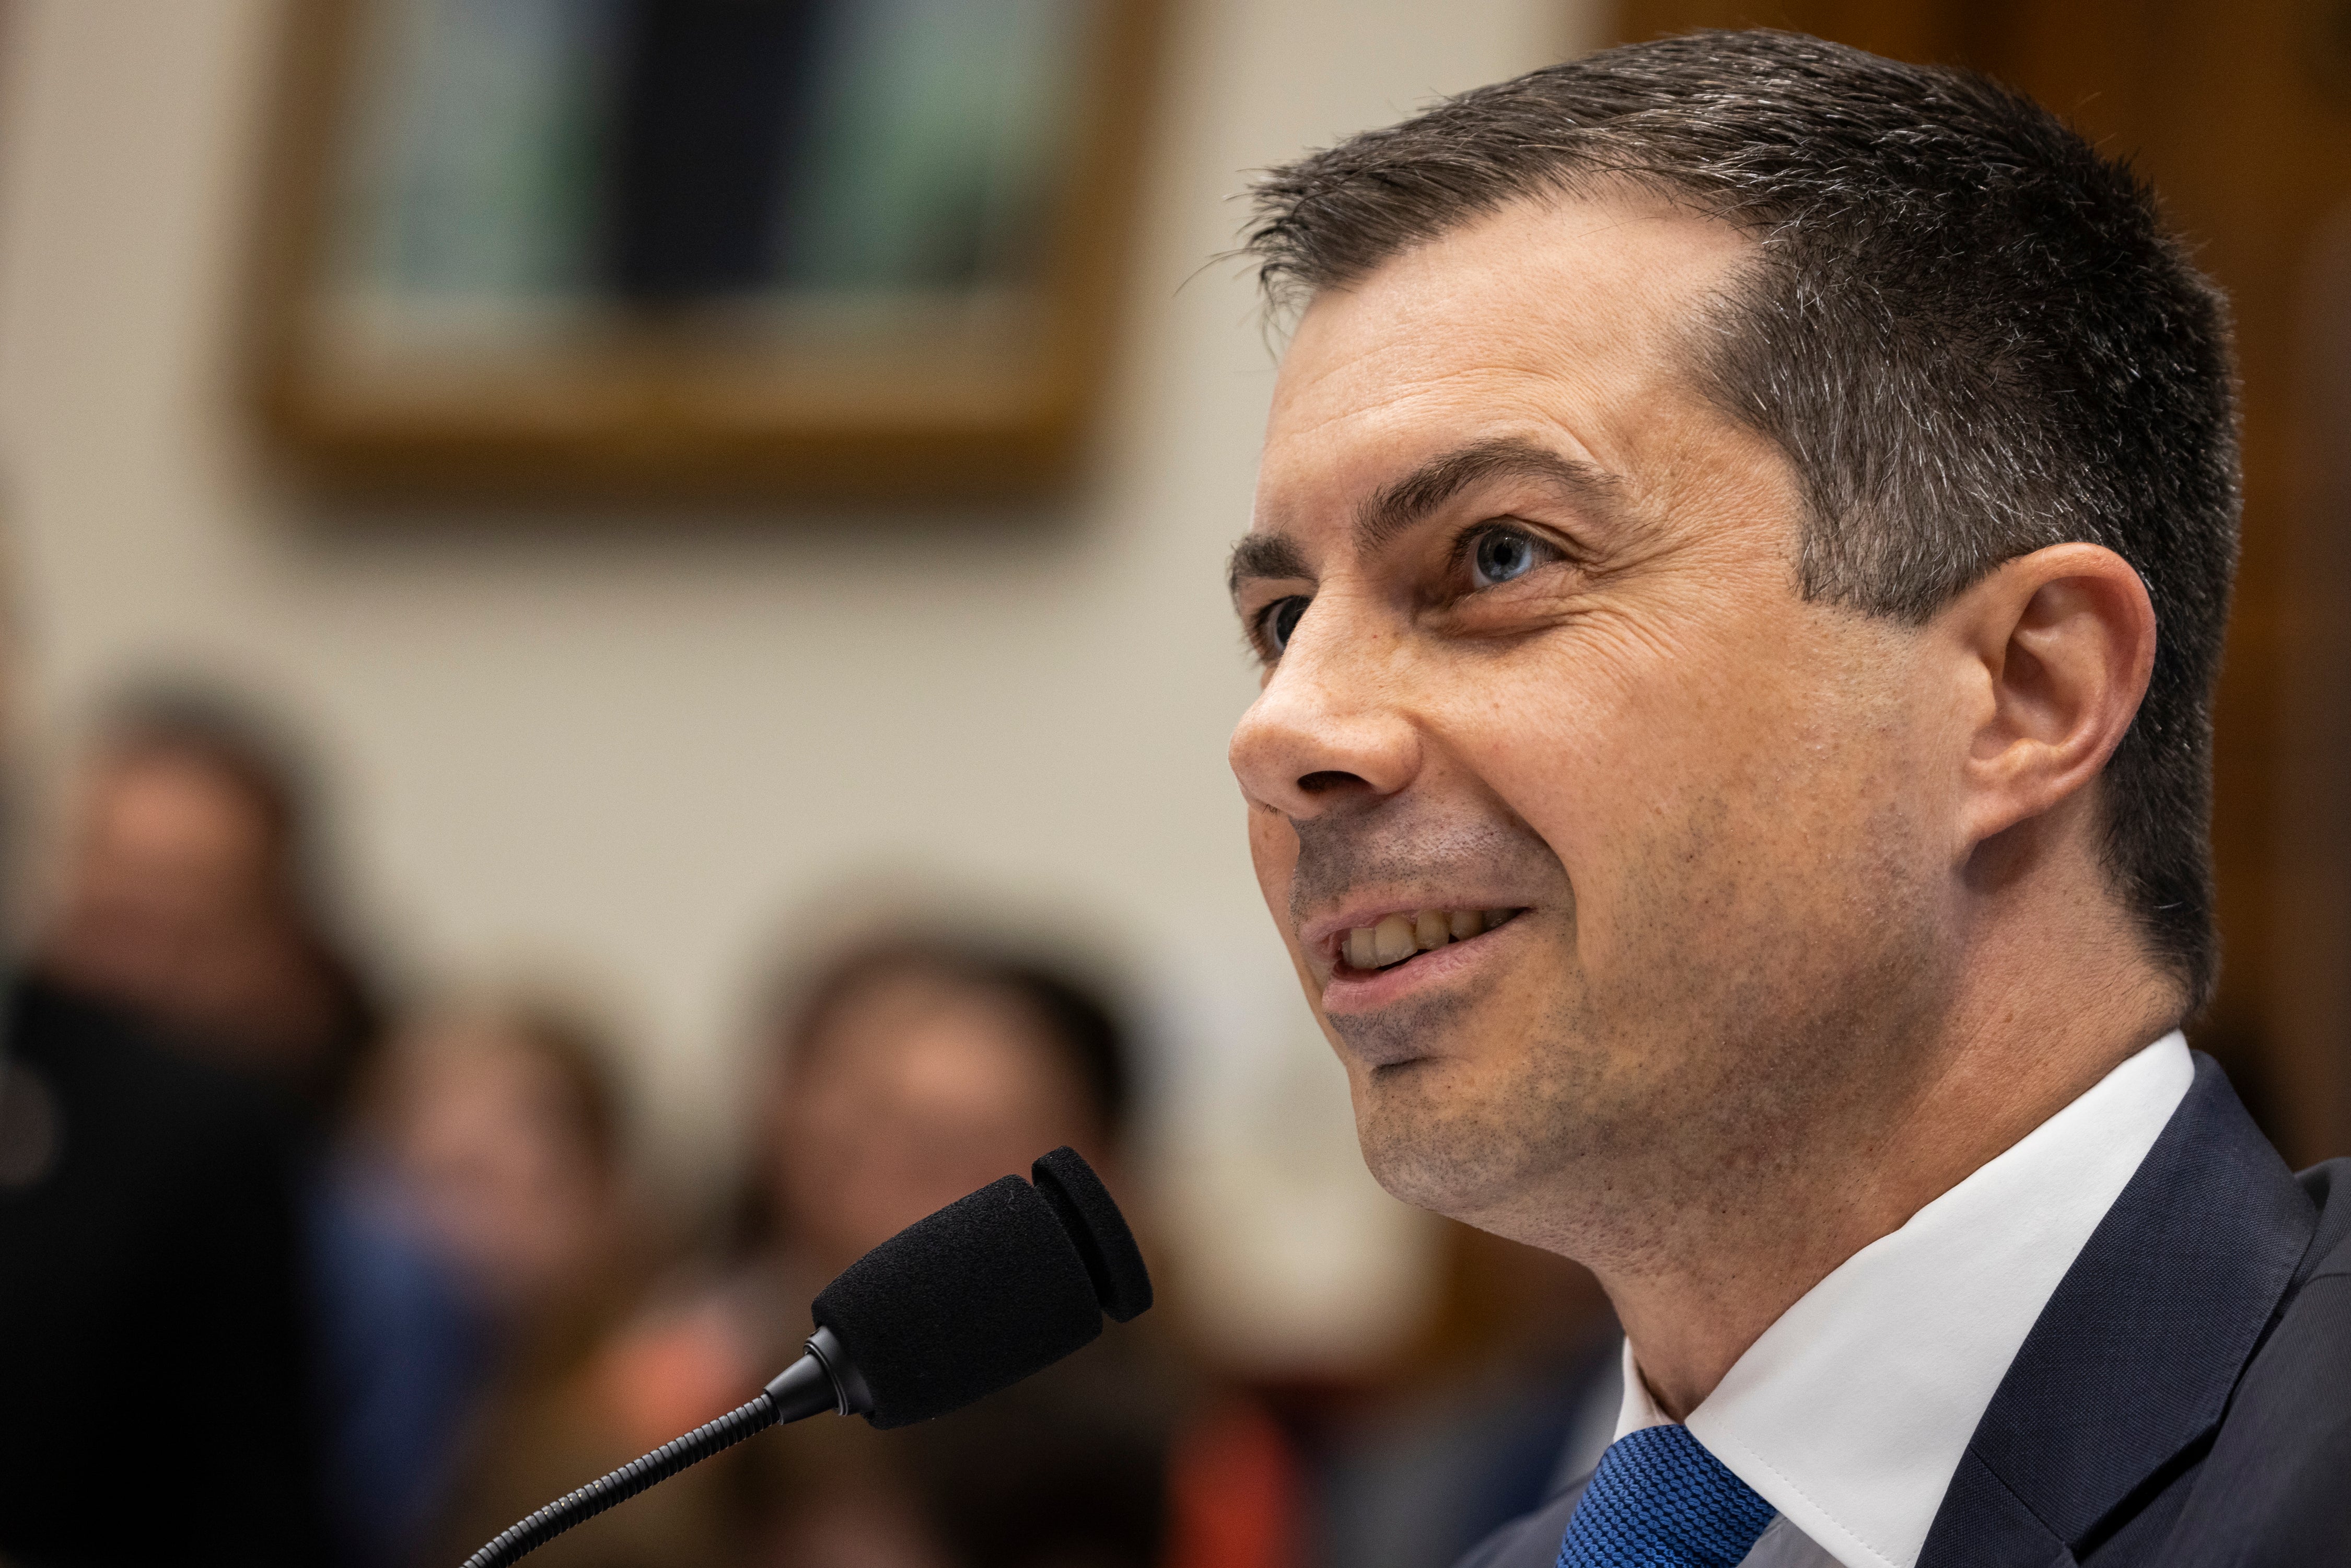 Secretary of Transportation Pete Buttigieg has been floated as a potential replacement for Biden.